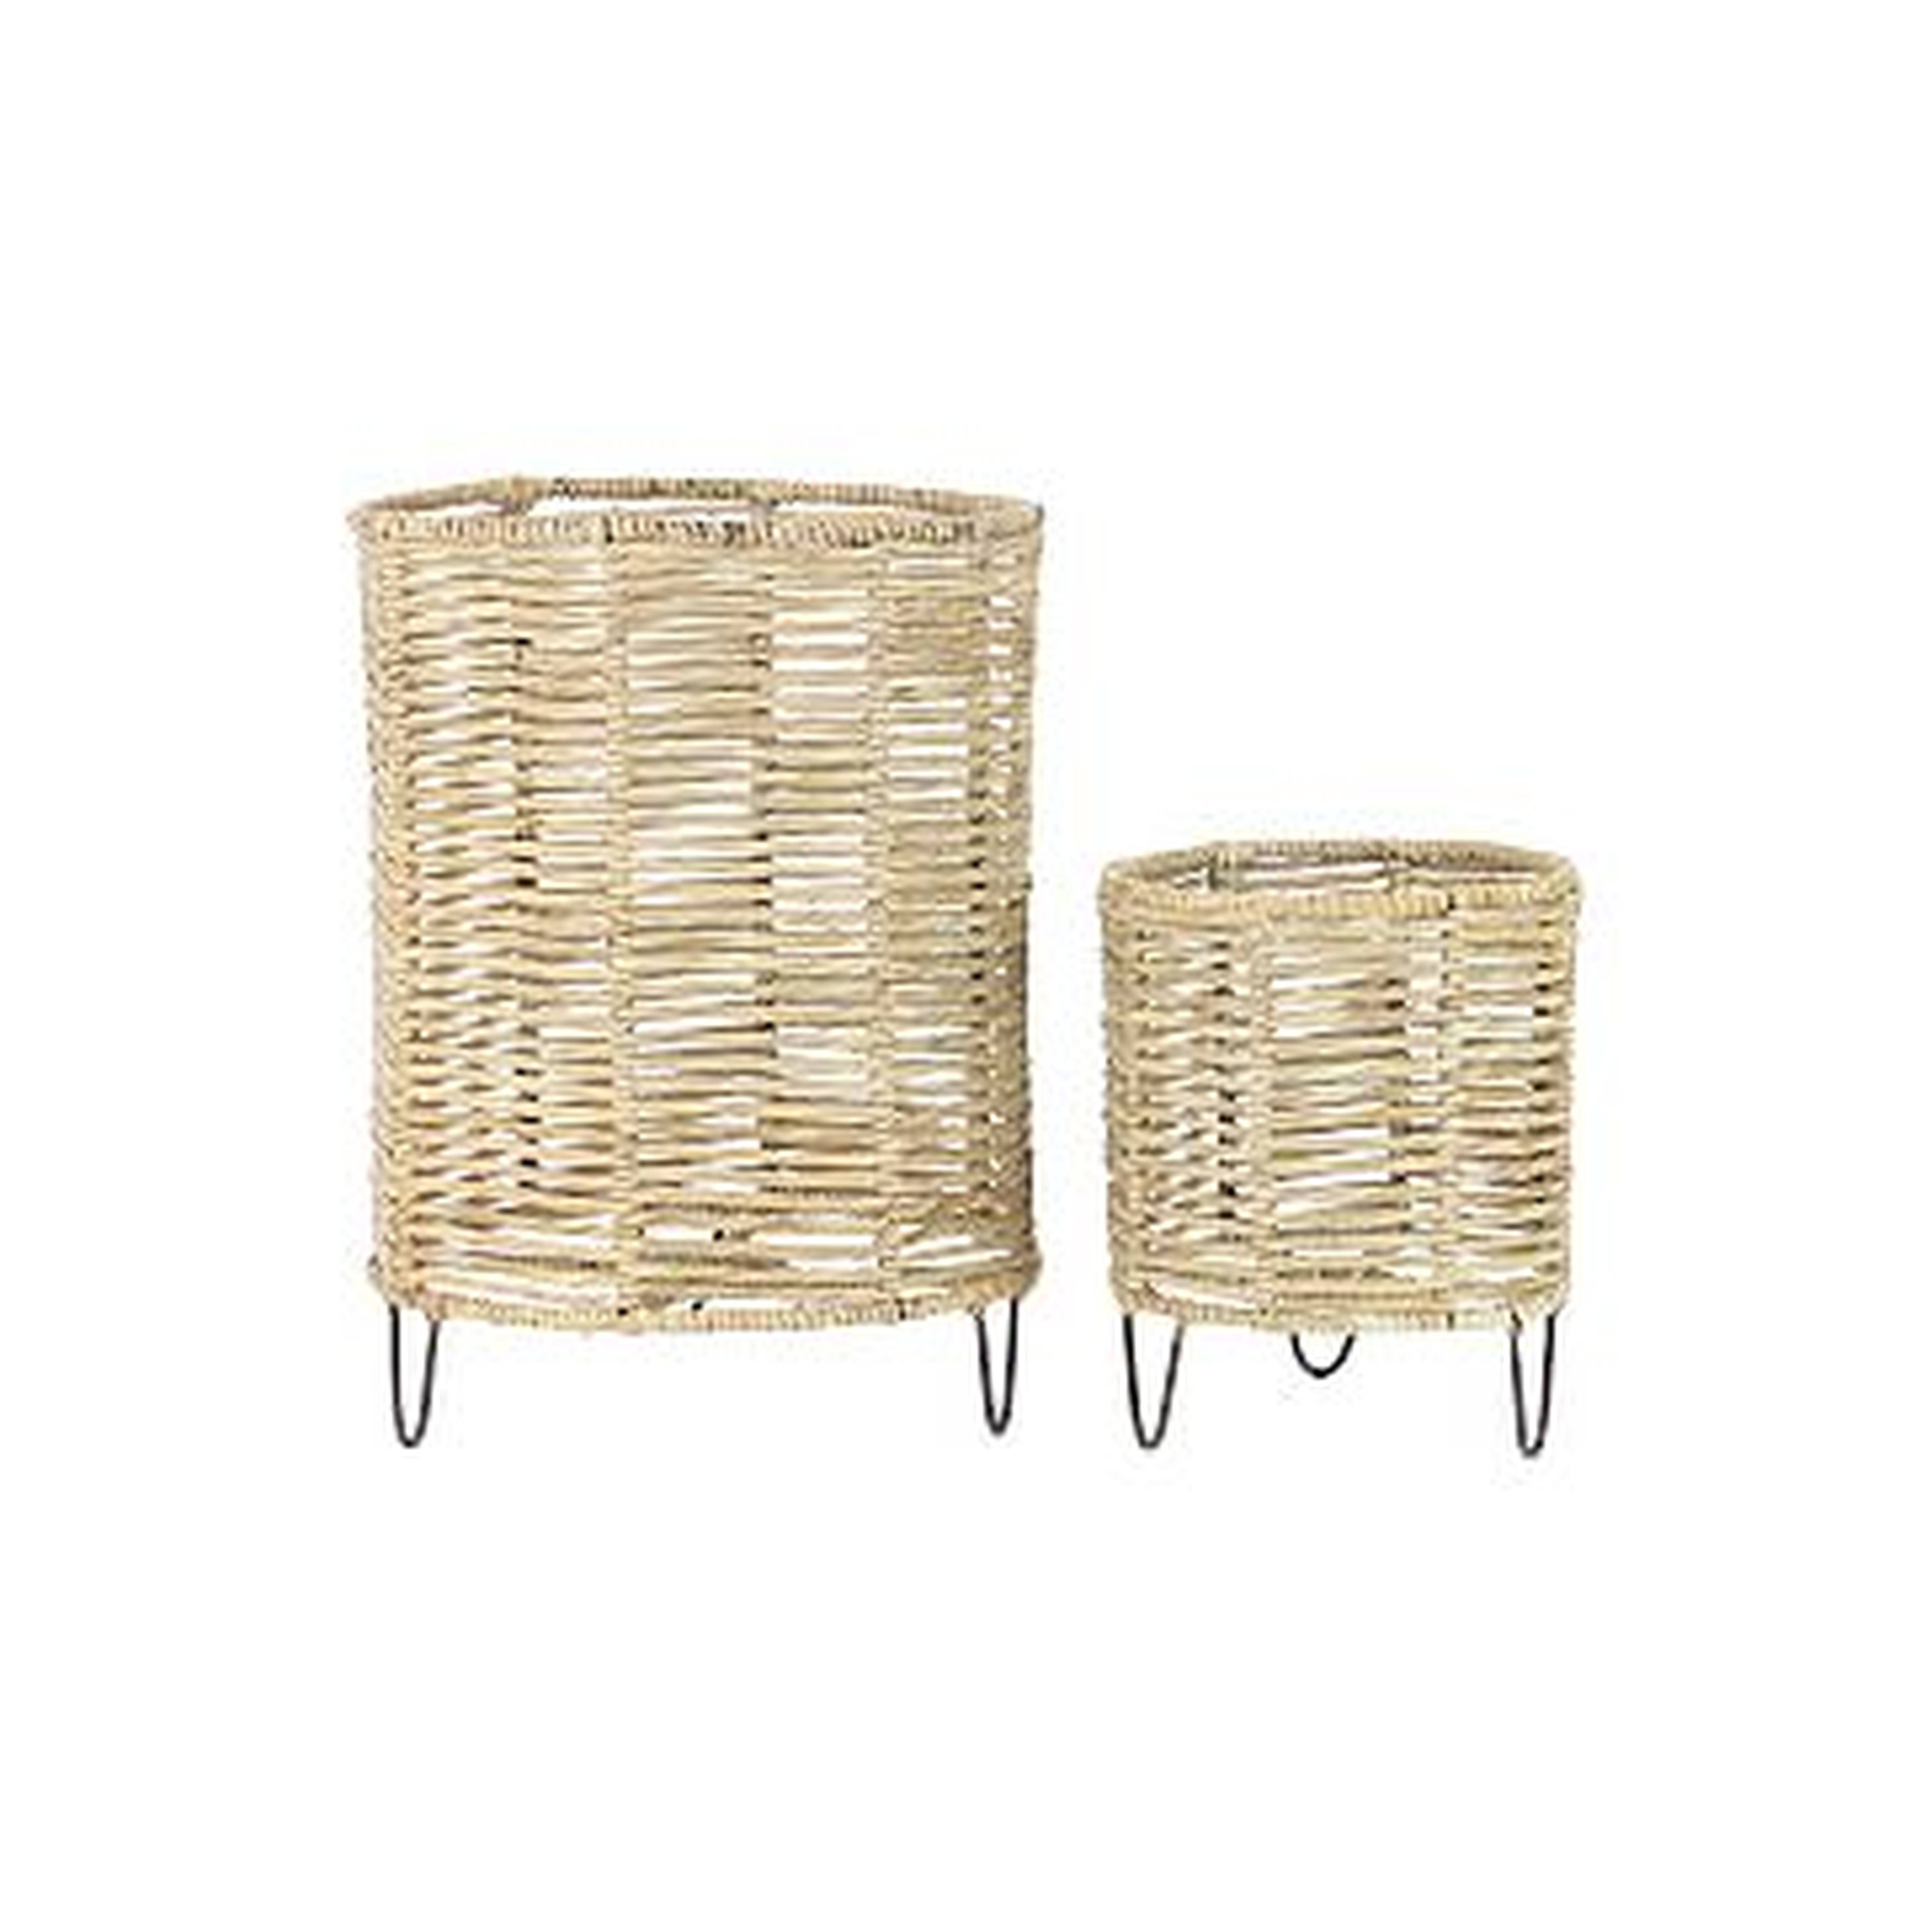 Woven Rush and Iron Baskets - West Elm